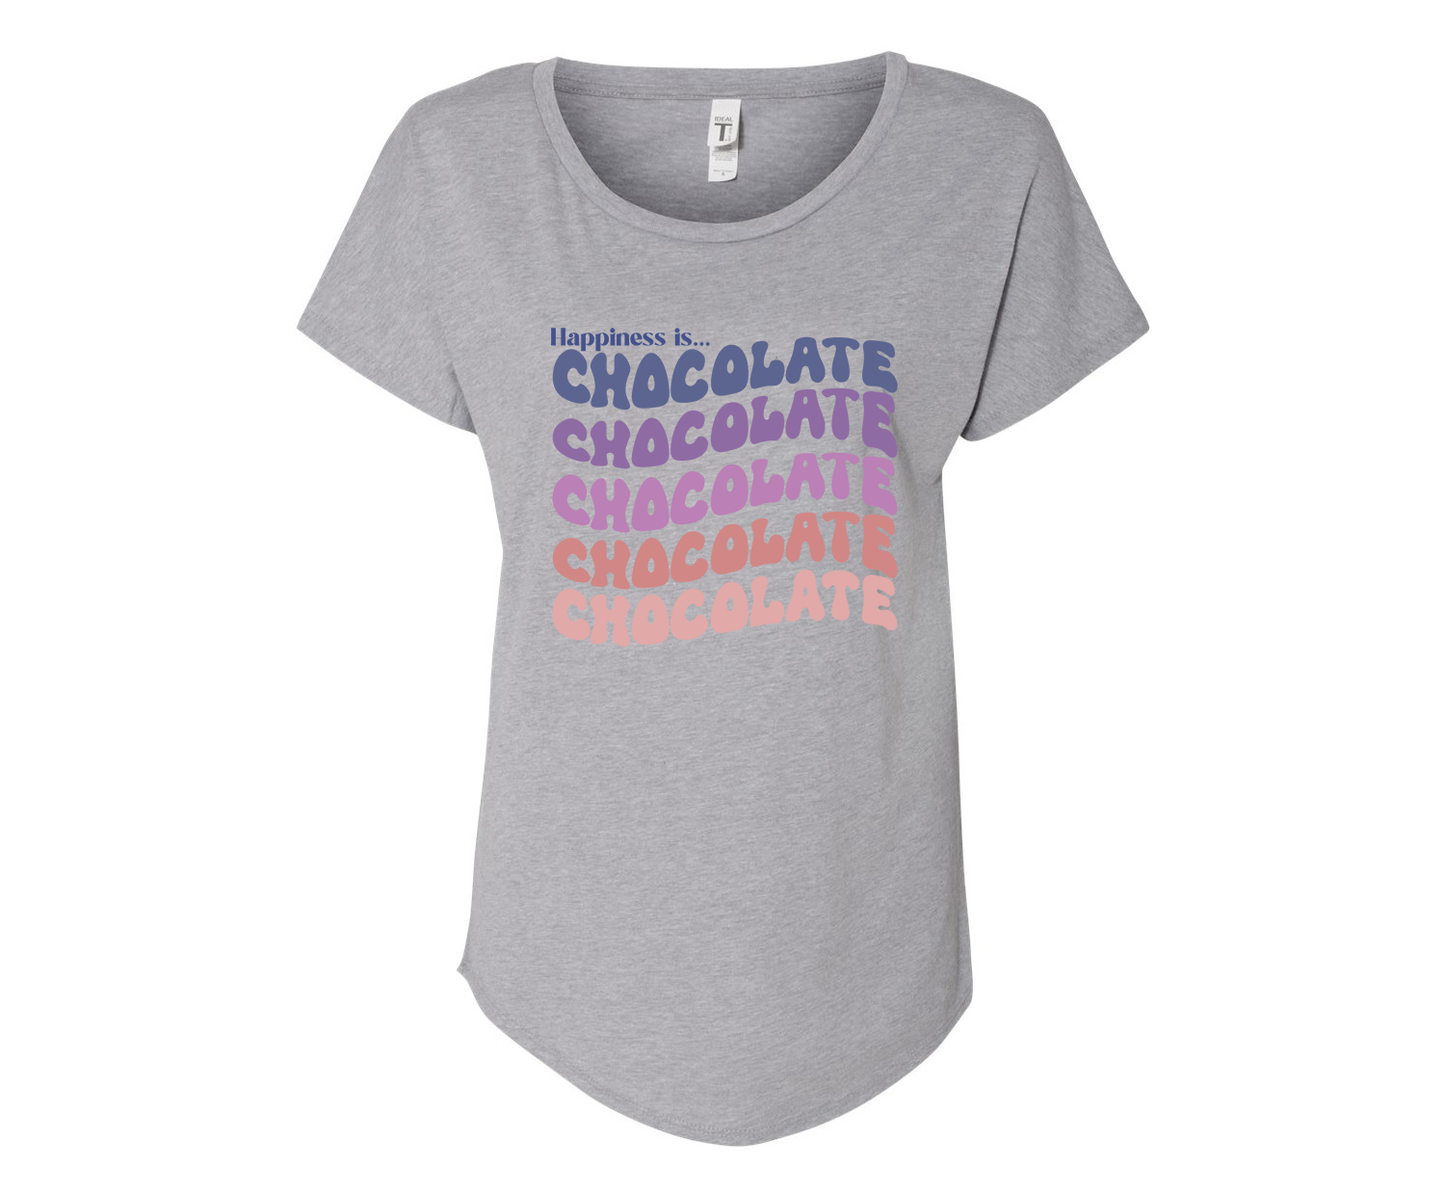 Happiness is Chocolate Ladies Tee Shirt - In White & Grey